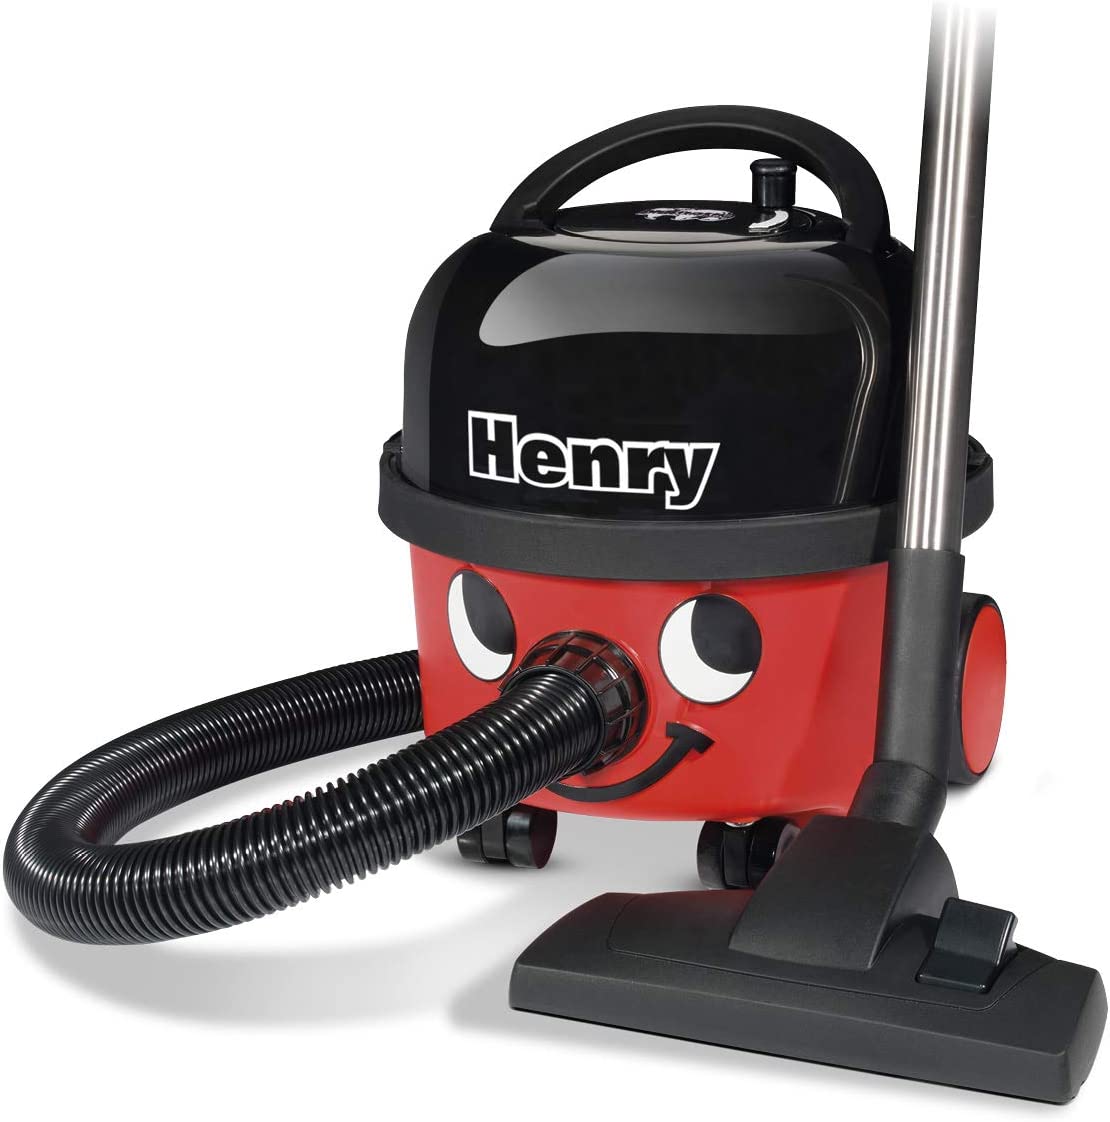 The Iconic Henry Vacuum Cleaner – A Quick Guide